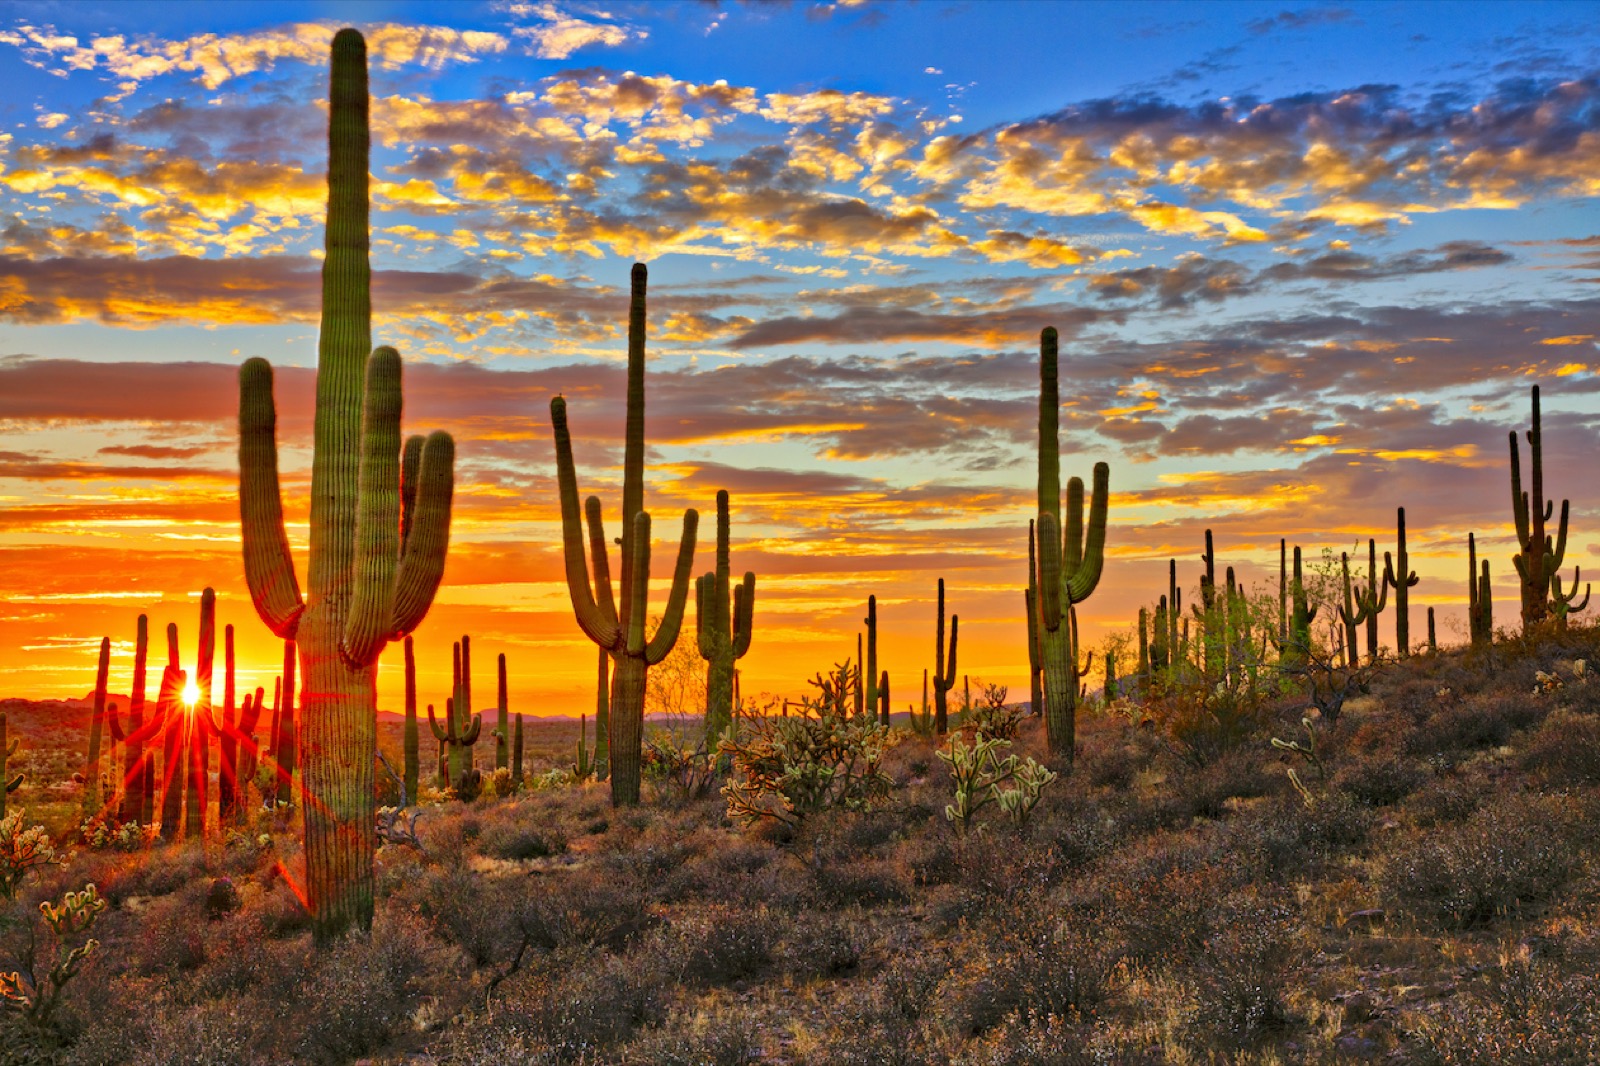 The Average Person Can Score 15/26 on This Trivia Quiz, So to Impress Me, You’ll Have to Score Least 20 Sonoran